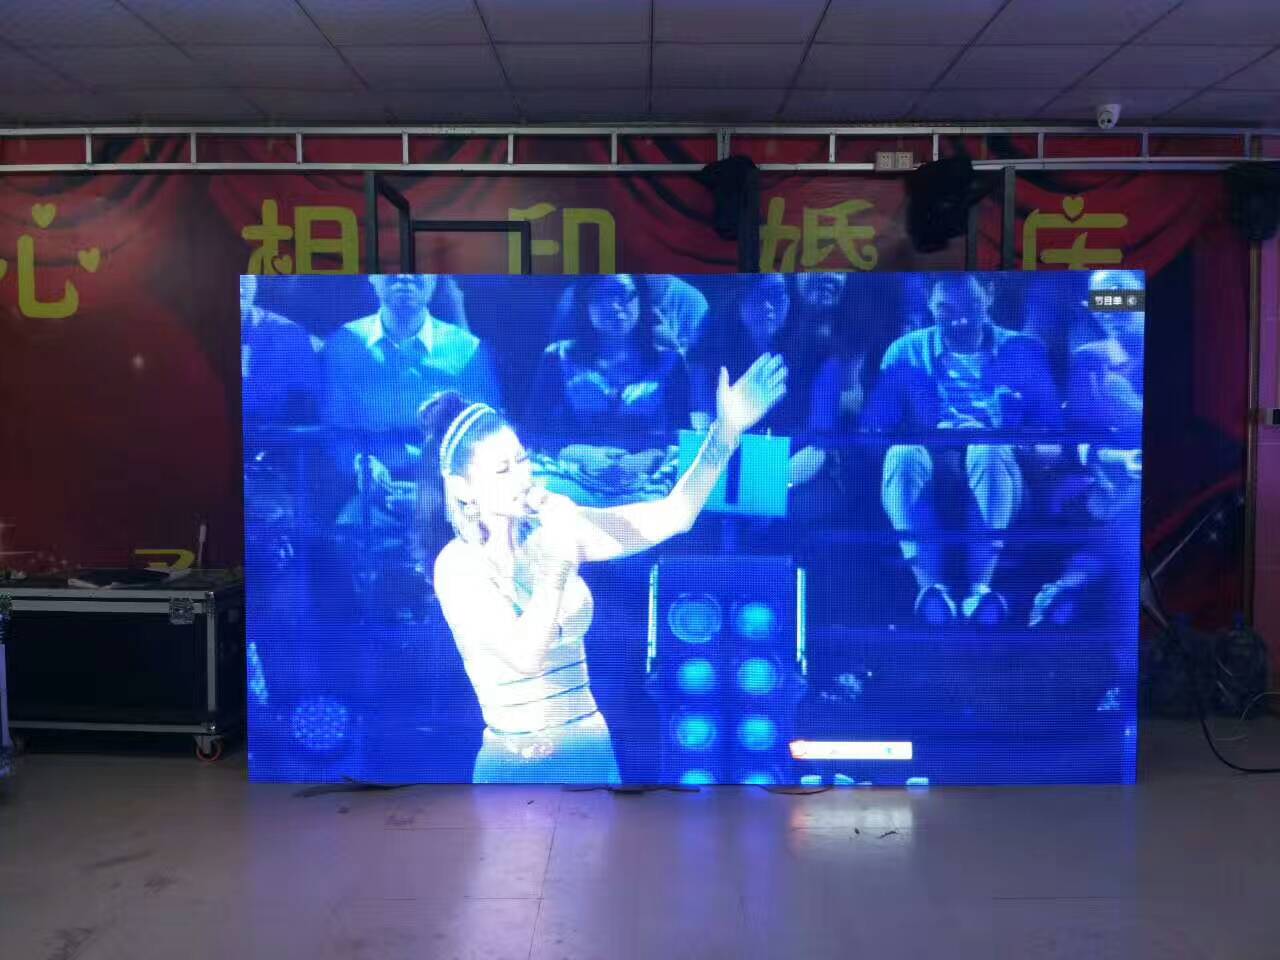 Heart color wedding P3.91 pressure leasing LED full color screen installation is completed